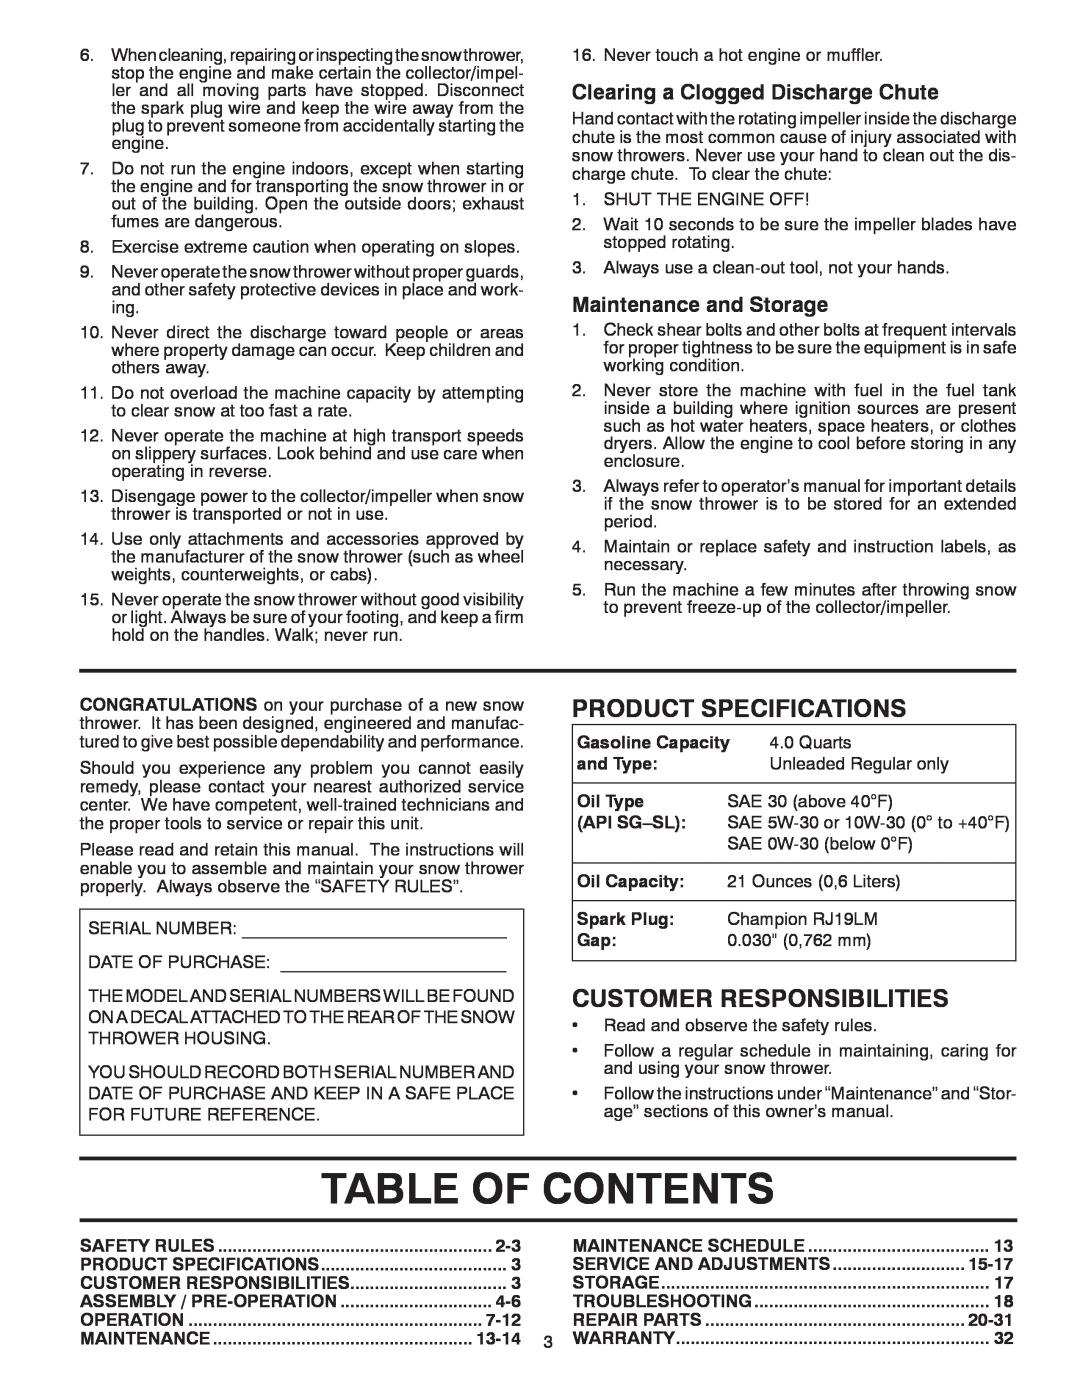 Poulan 415180 Table Of Contents, Product Specifications, Customer Responsibilities, Clearing a Clogged Discharge Chute 